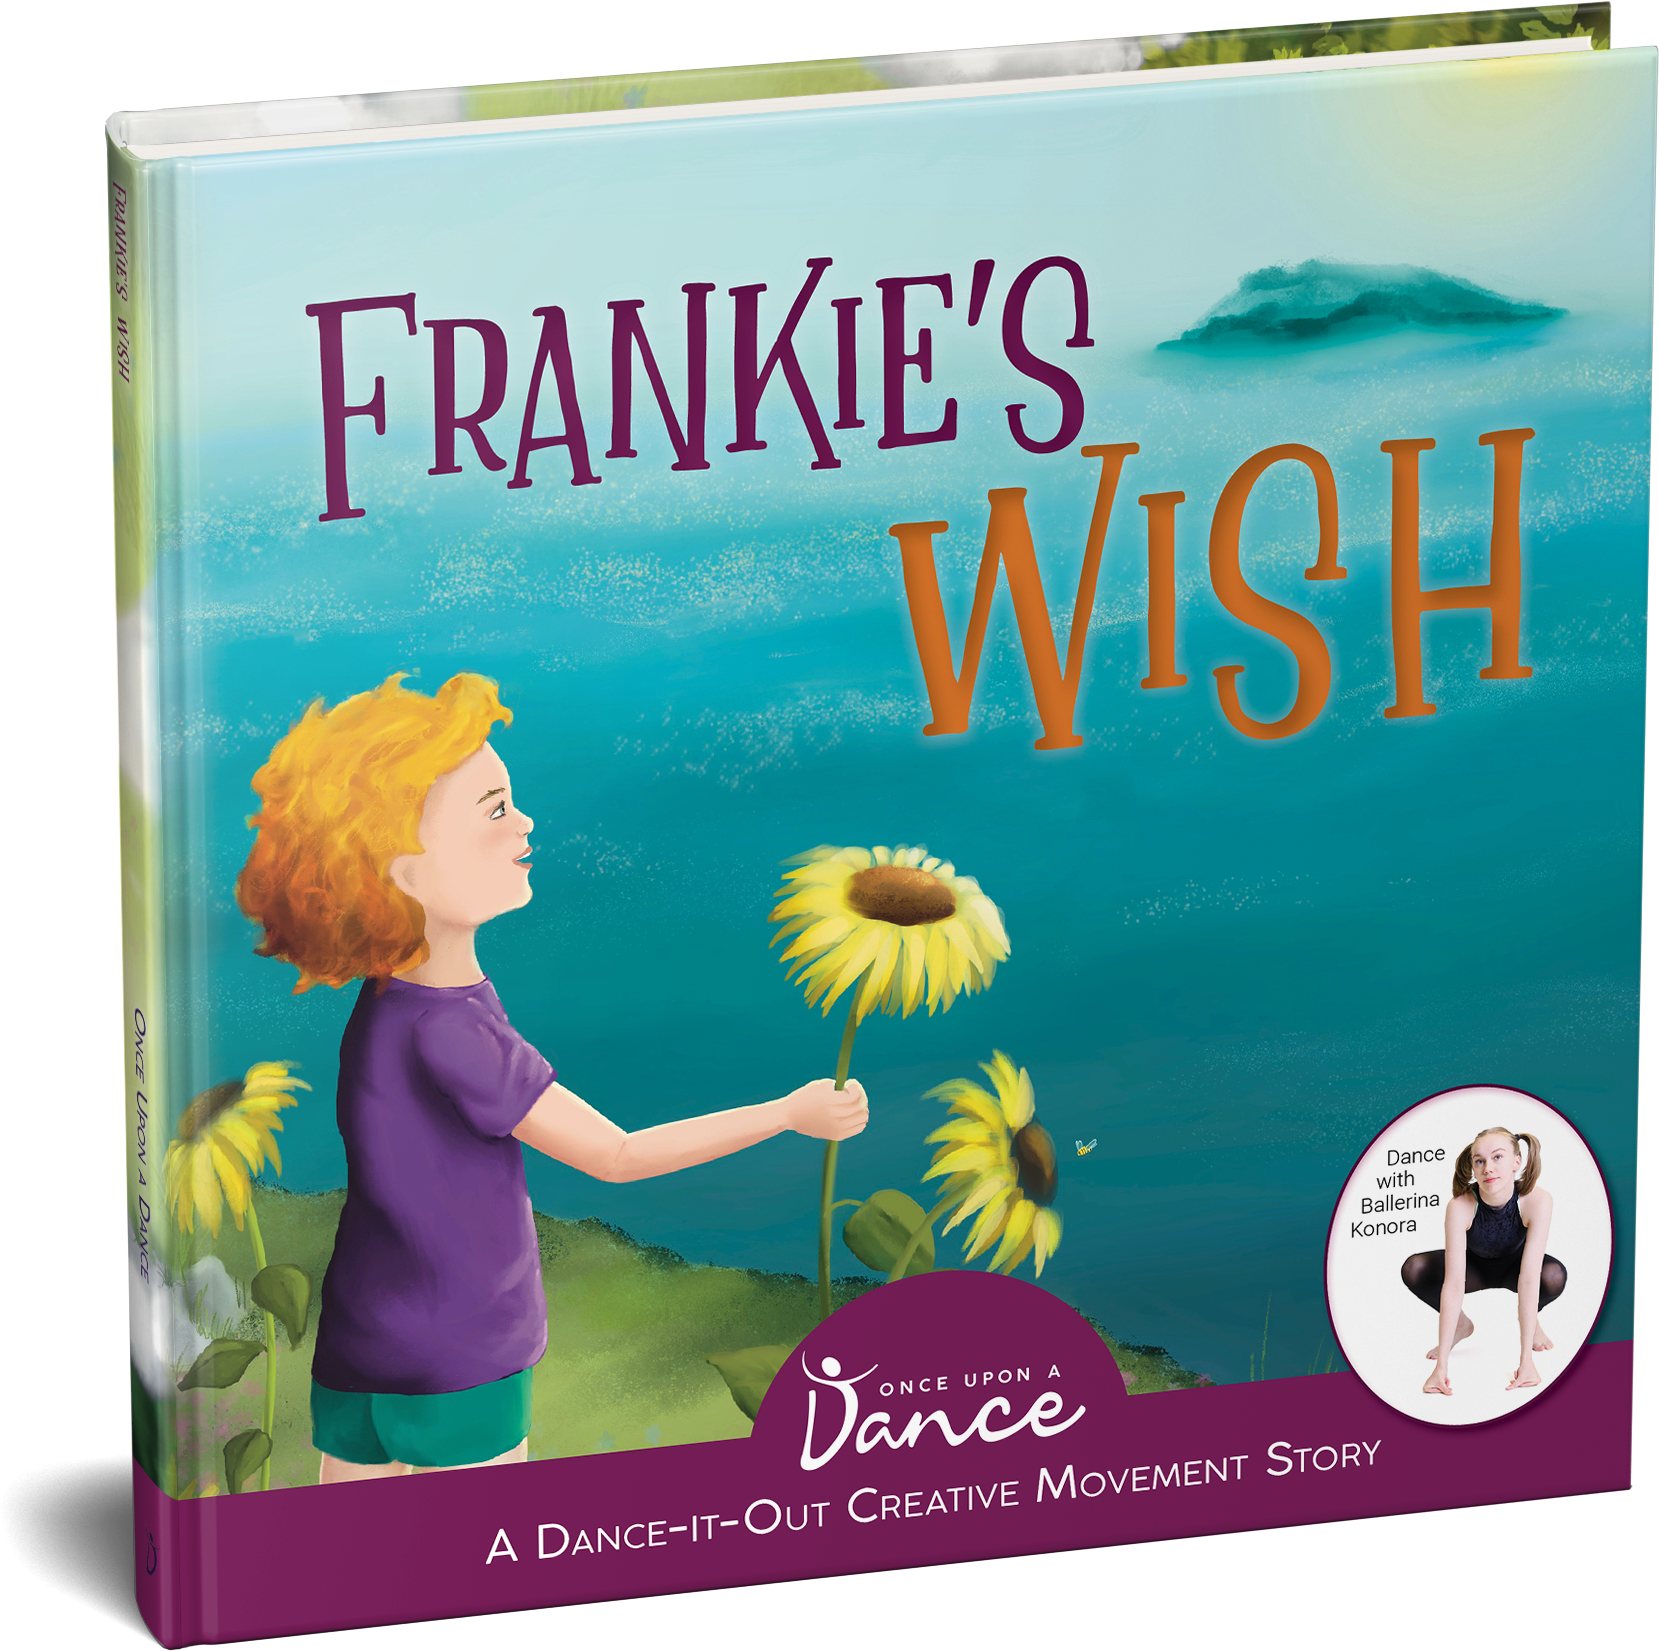 Frankie's Wish book cover based on Price Sculpture Forest